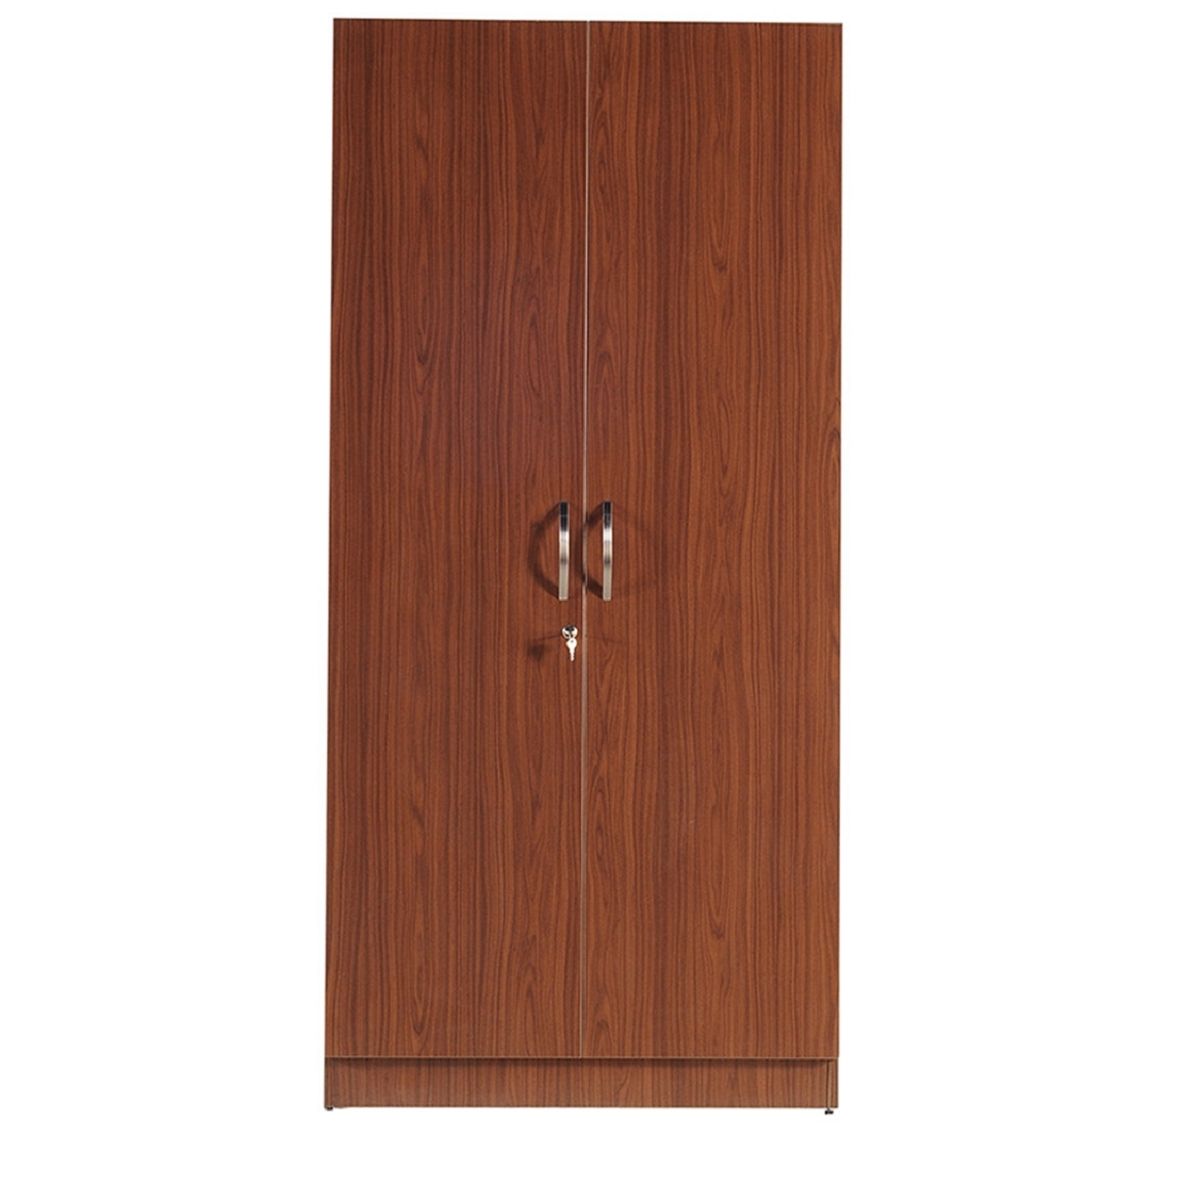 Cheap Wooden Wardrobes For Latest Picture Of Fresh Design Cheap Wooden Wardrobes Wood Wardrobe (View 5 of 15)